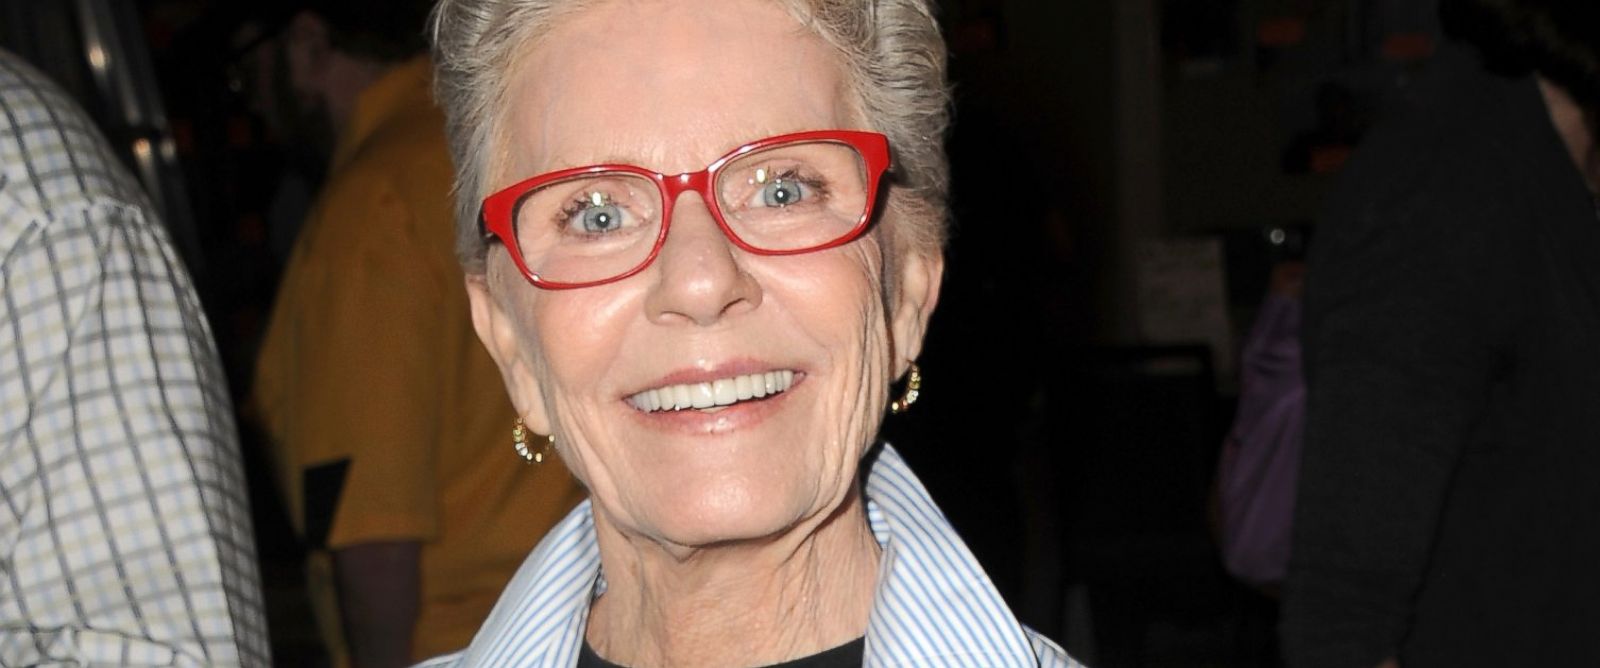 Patty Duke Is Dead at 69